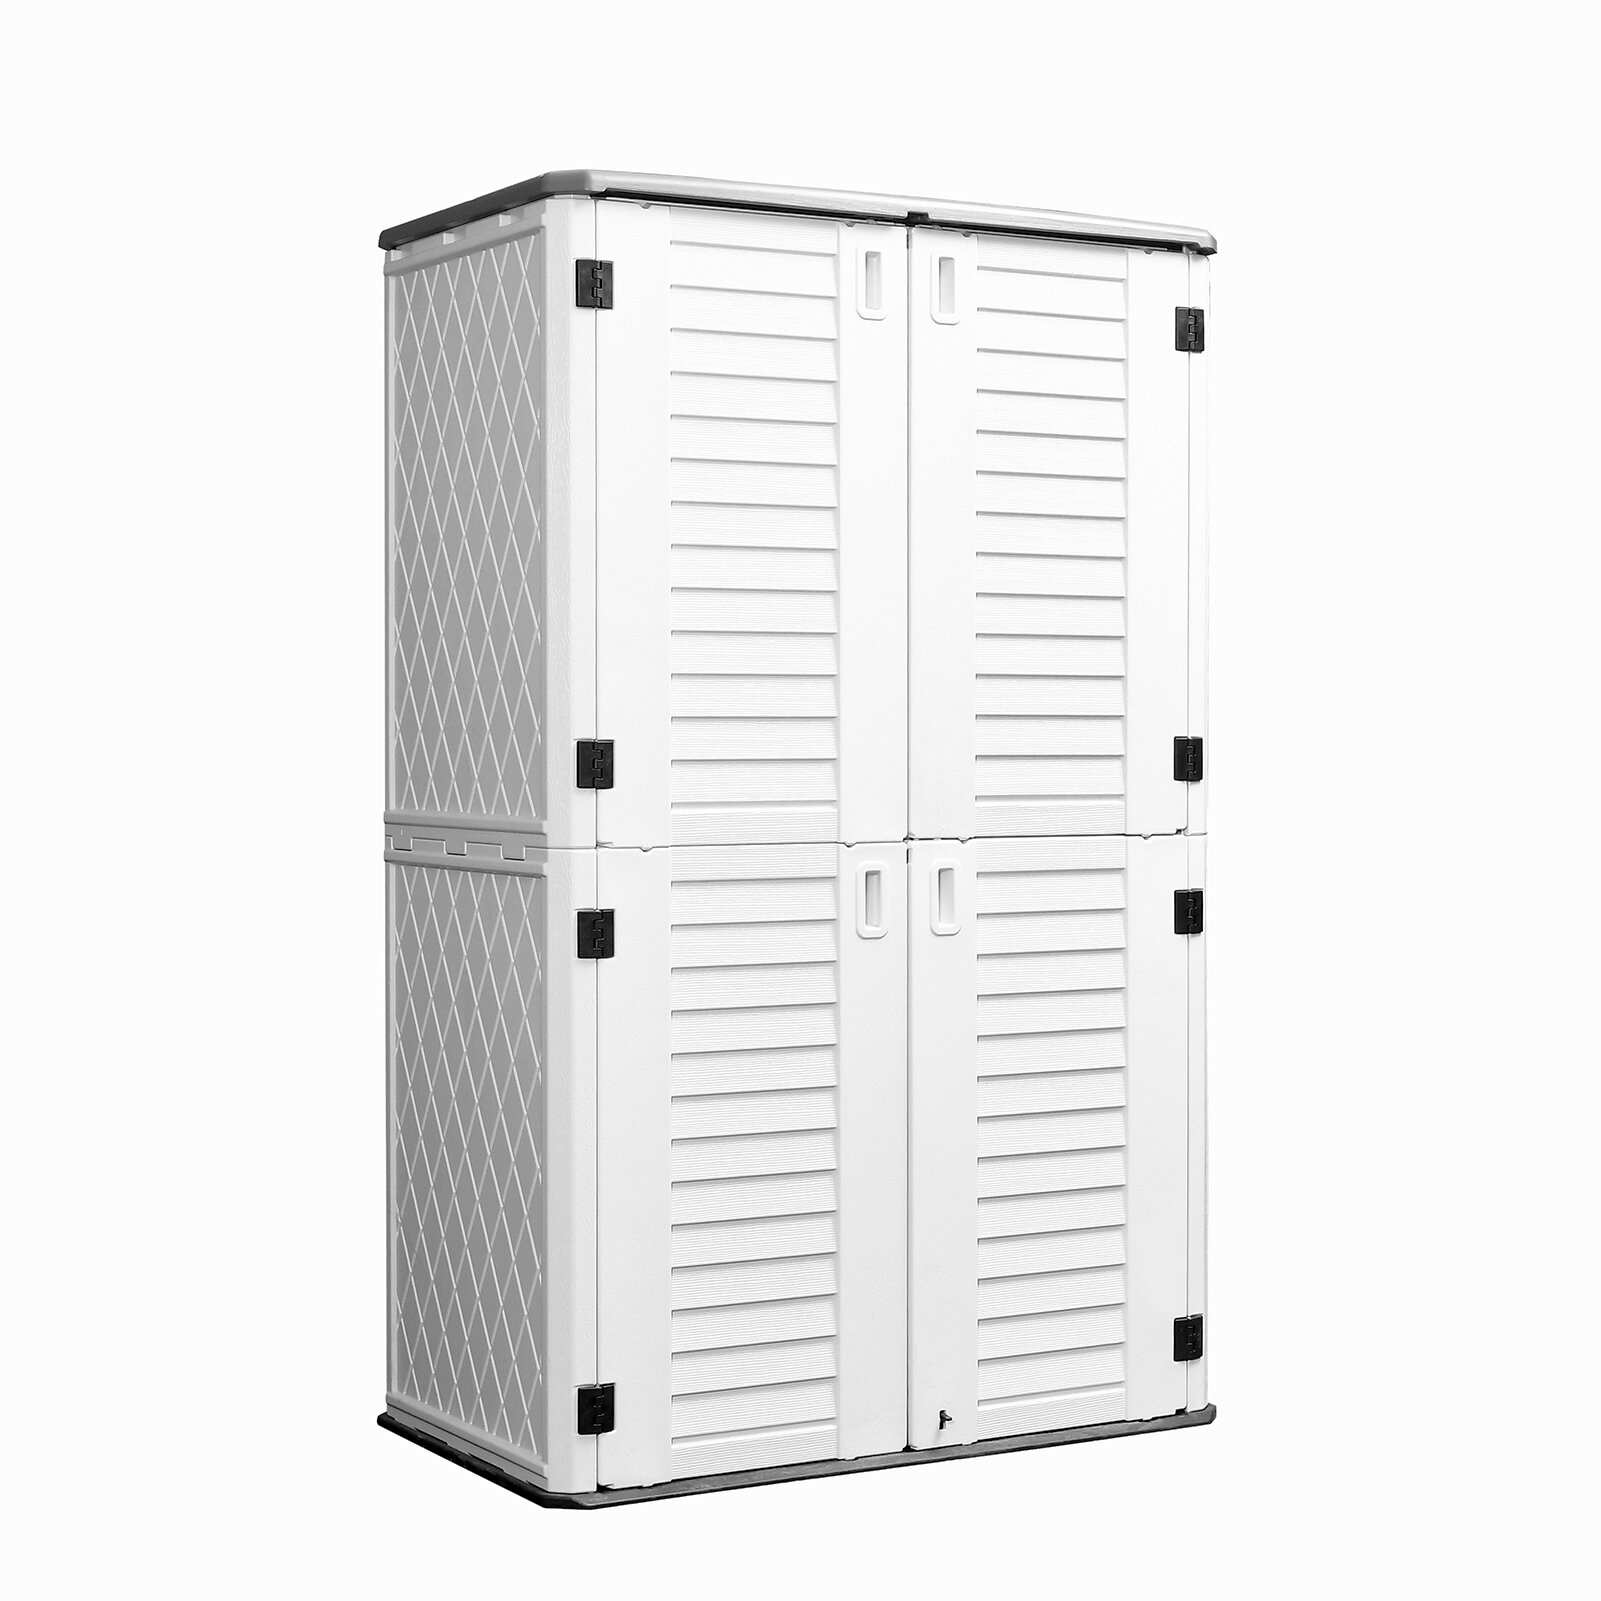 Patio Lockable Outdoor Storage Cabinet Weather Resistance ADDOK Horizontal Storage Shed Multi-Function Thick HDEP Resin Storage Unit for Backyards Garden Ivory White/27 Cubic Feet